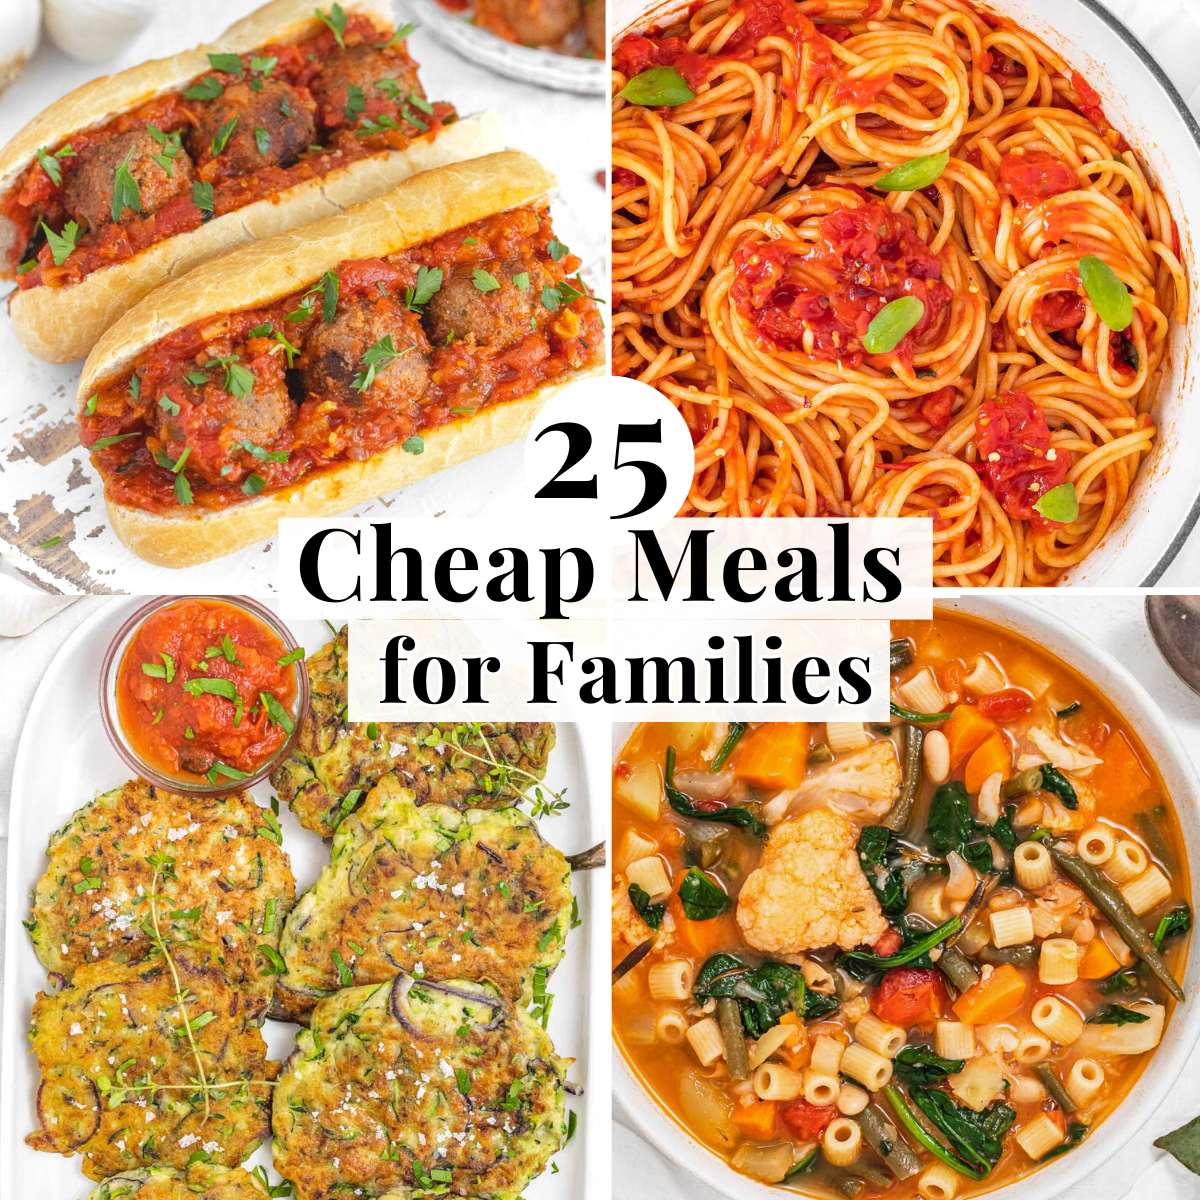 Inexpensive meal deals